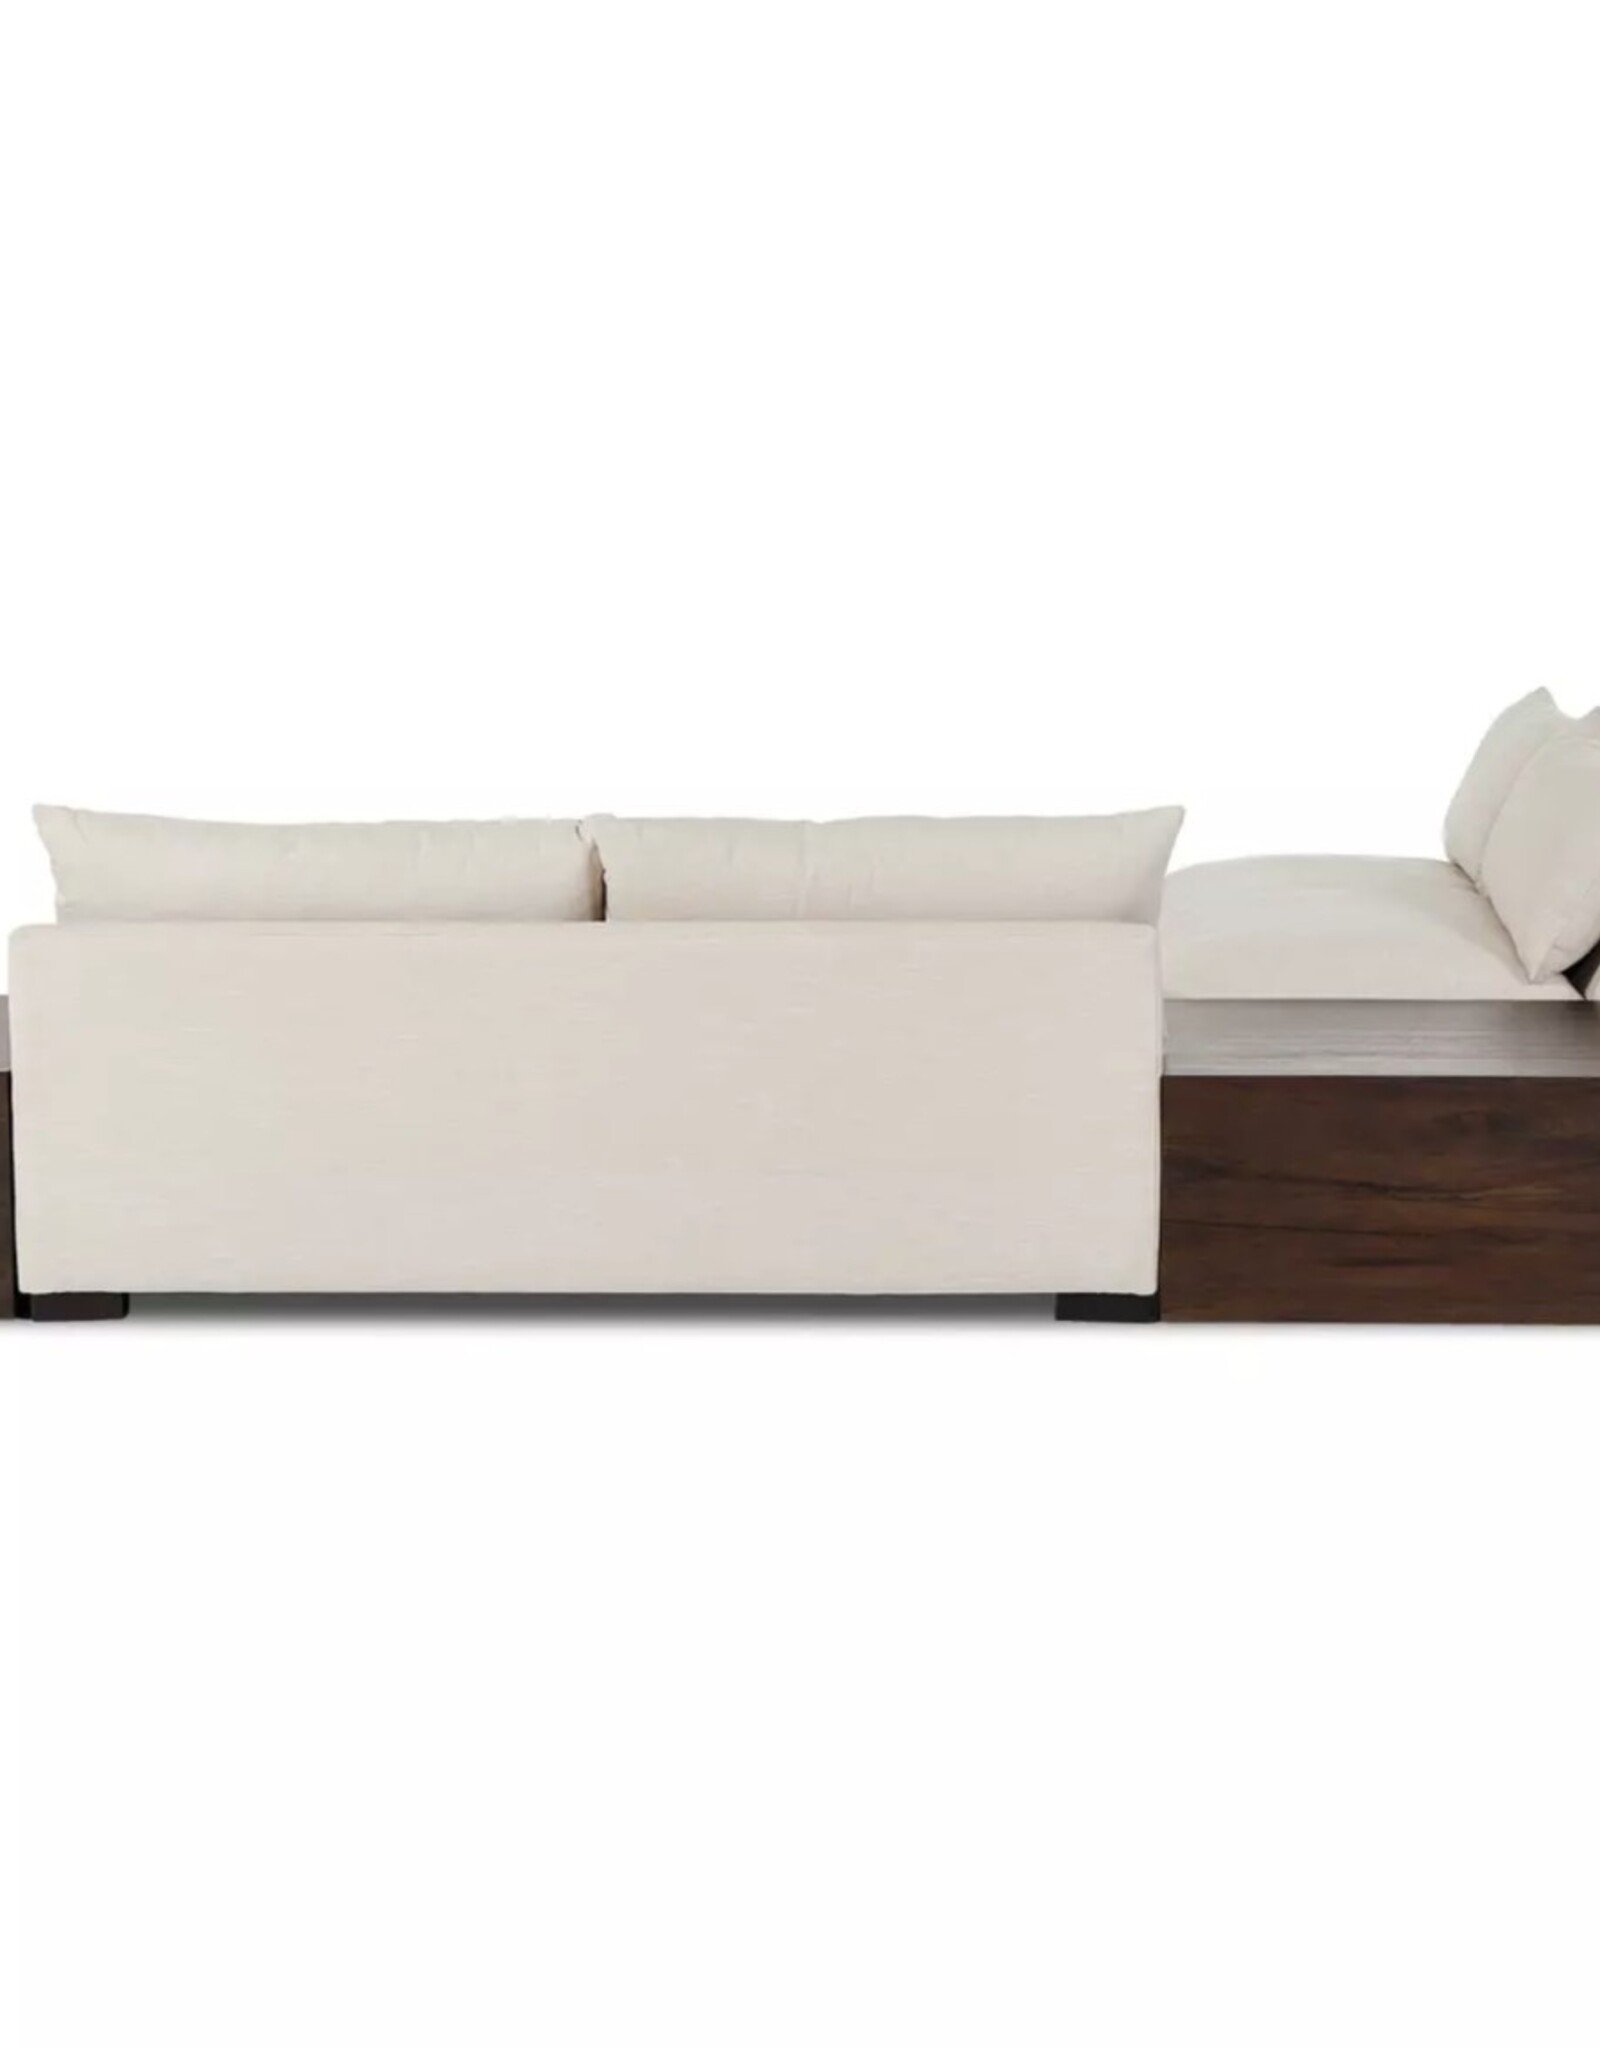 Grant 2 Pc Sectional W/ Corner + End Table